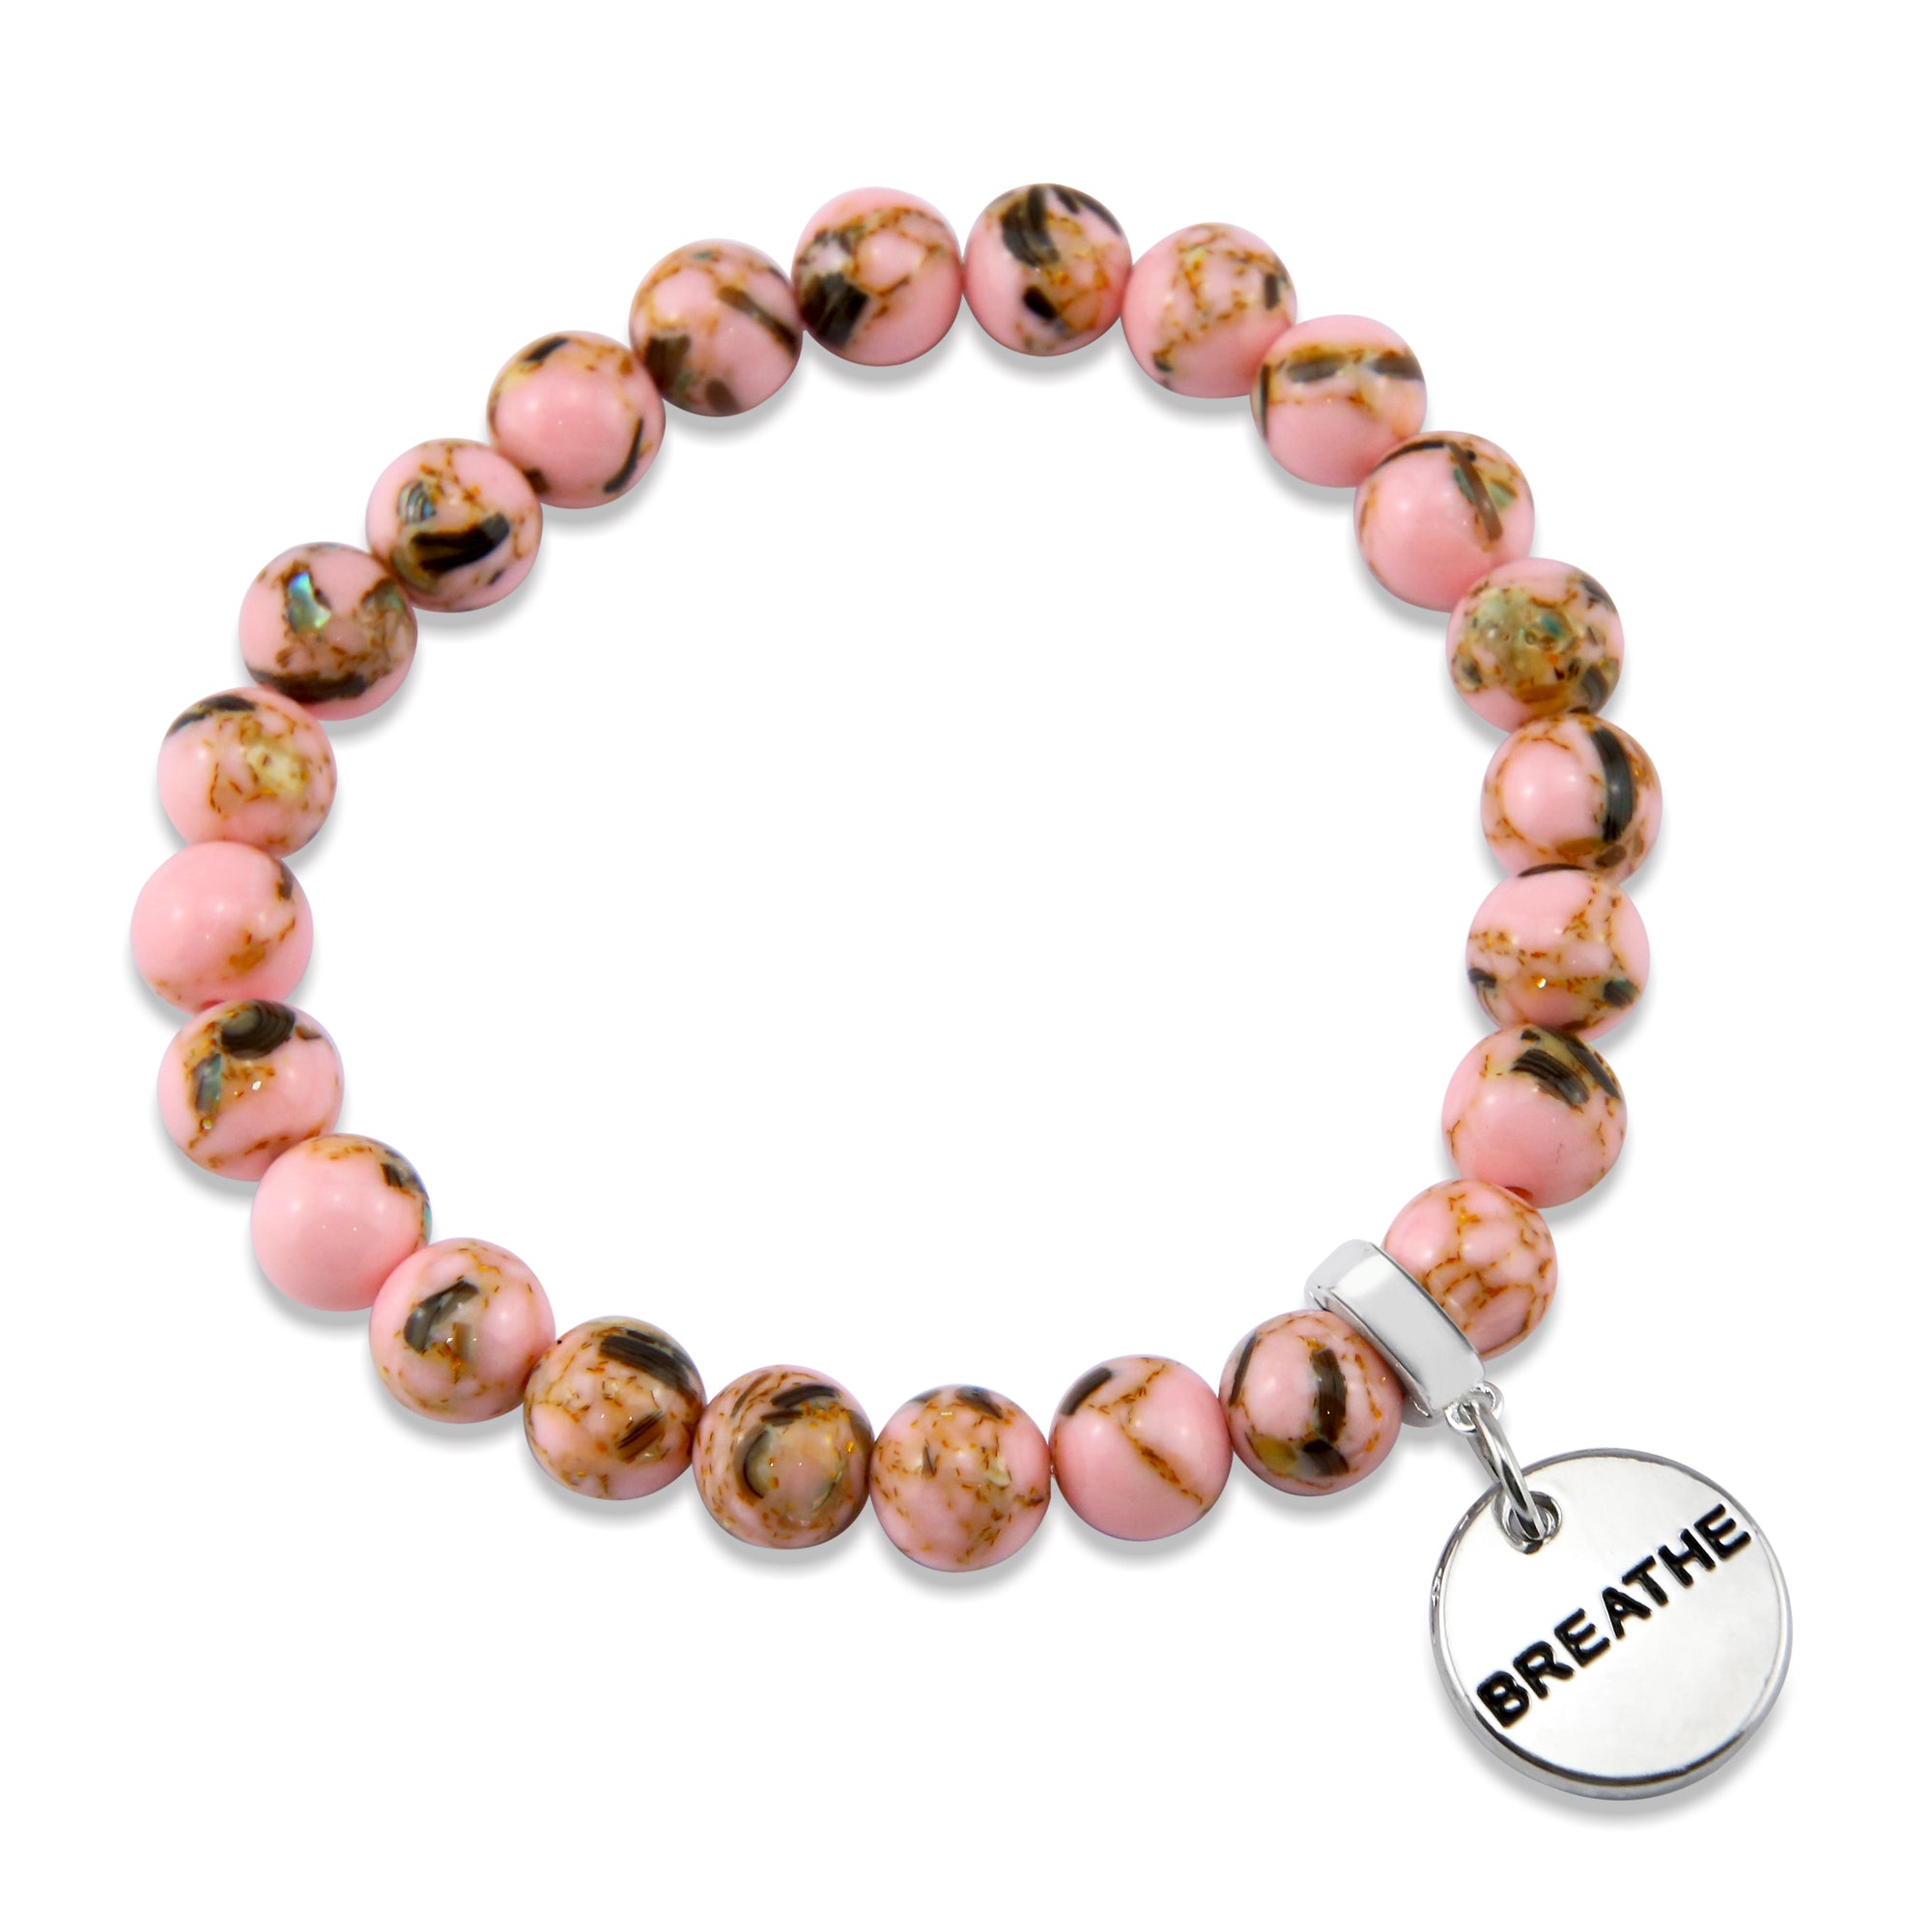 Soft Pink Synthesis Stone 8mm Bead Bracelet with Breathe Silver Word Charm. Fundraiser for the National Breast Cancer Foundation